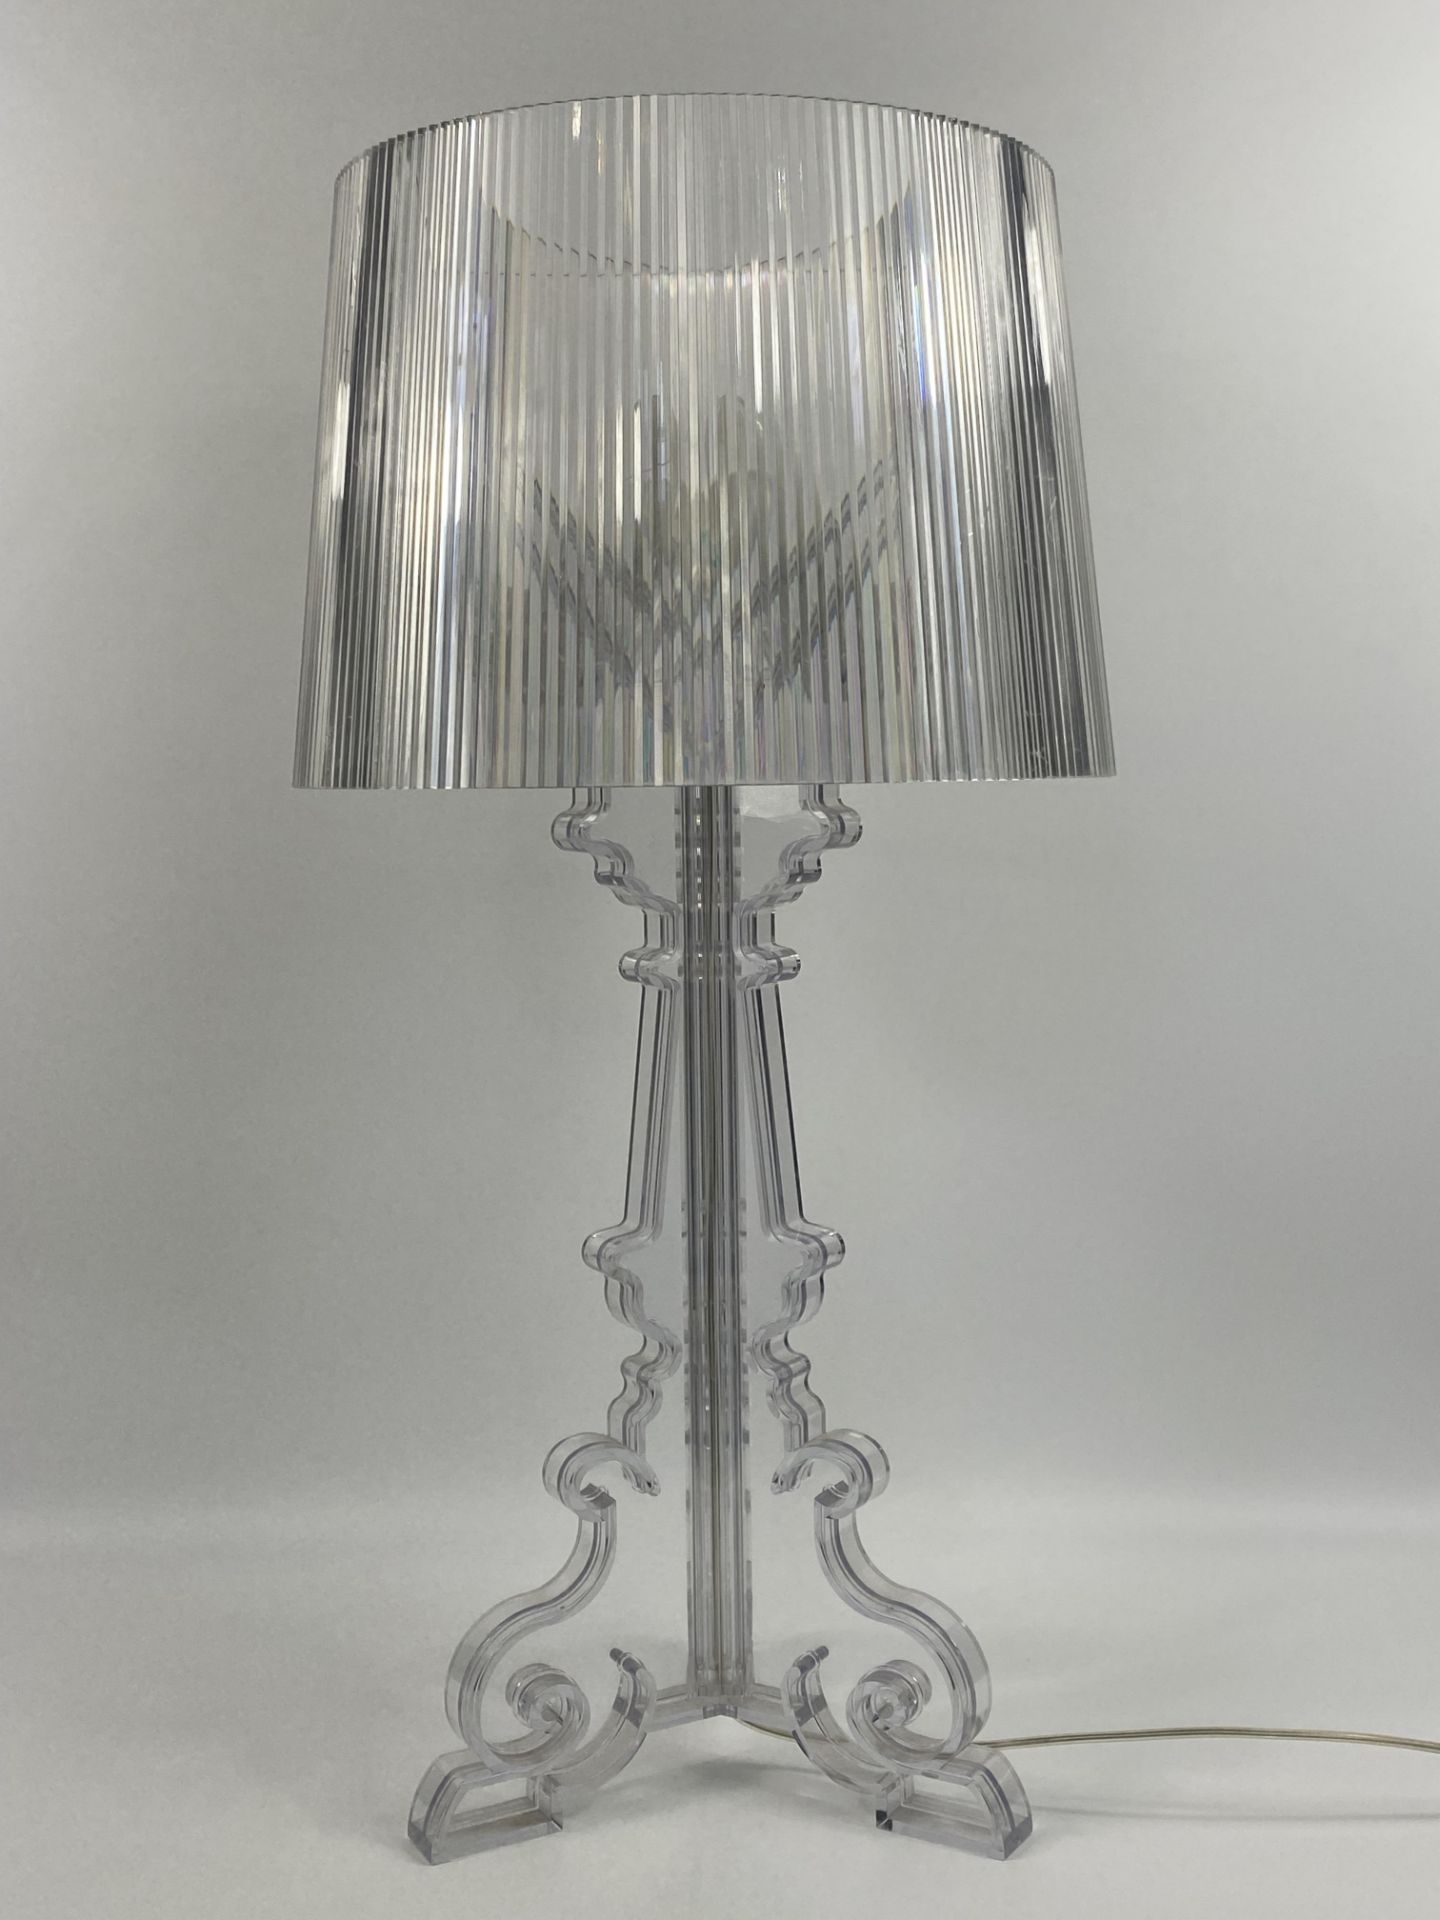 Kartell Bourgie table lamp - Image 5 of 5